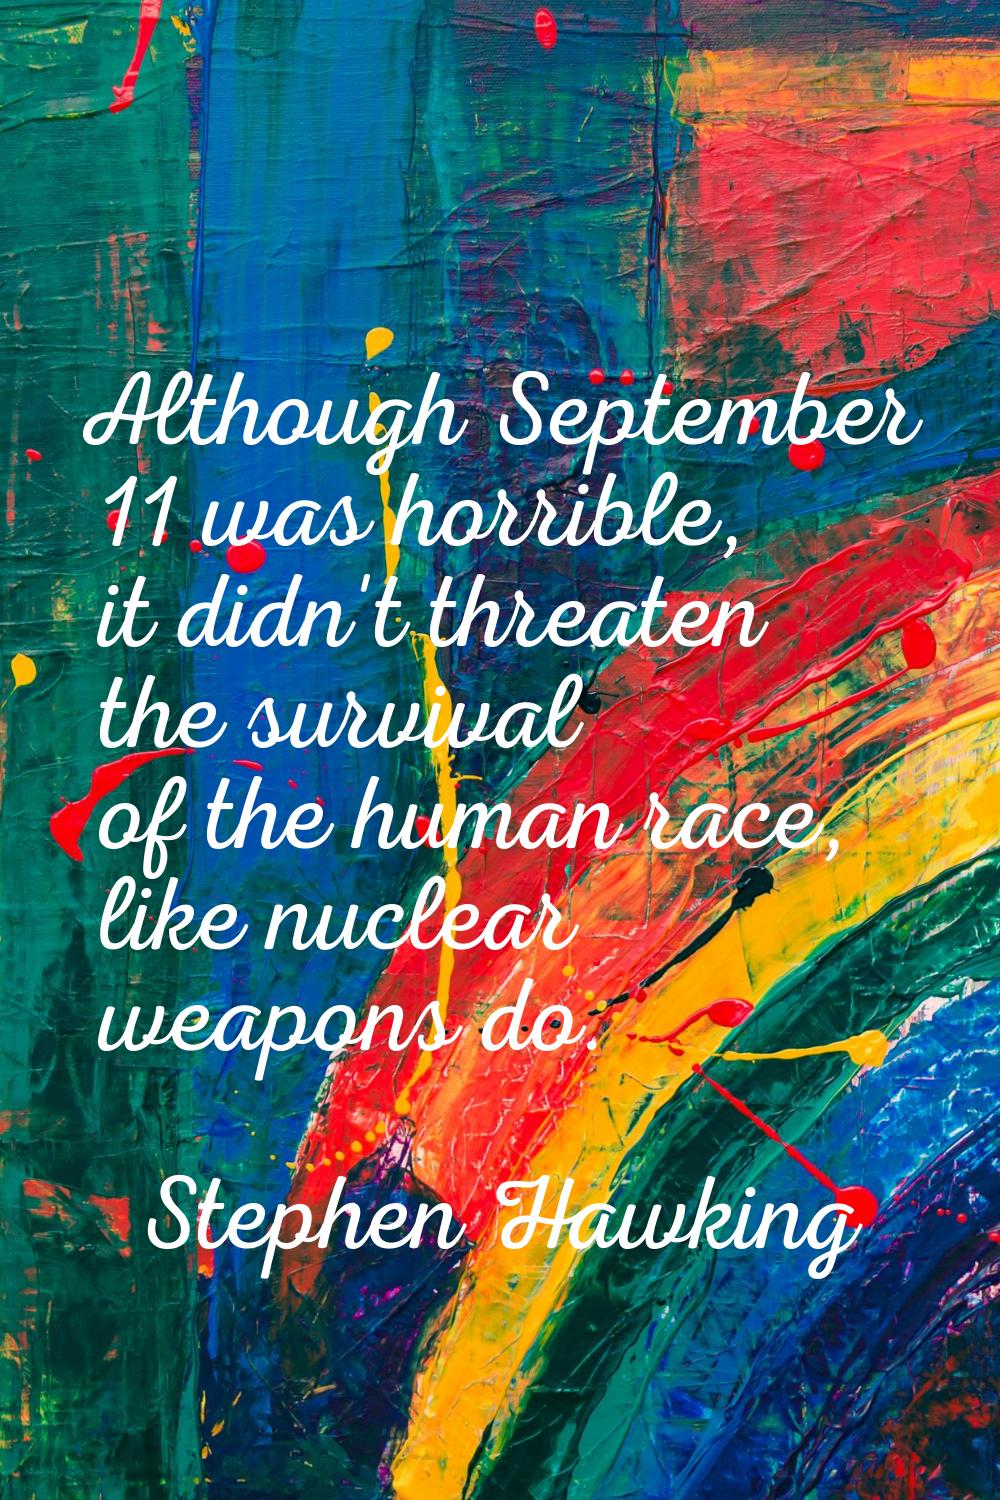 Although September 11 was horrible, it didn't threaten the survival of the human race, like nuclear